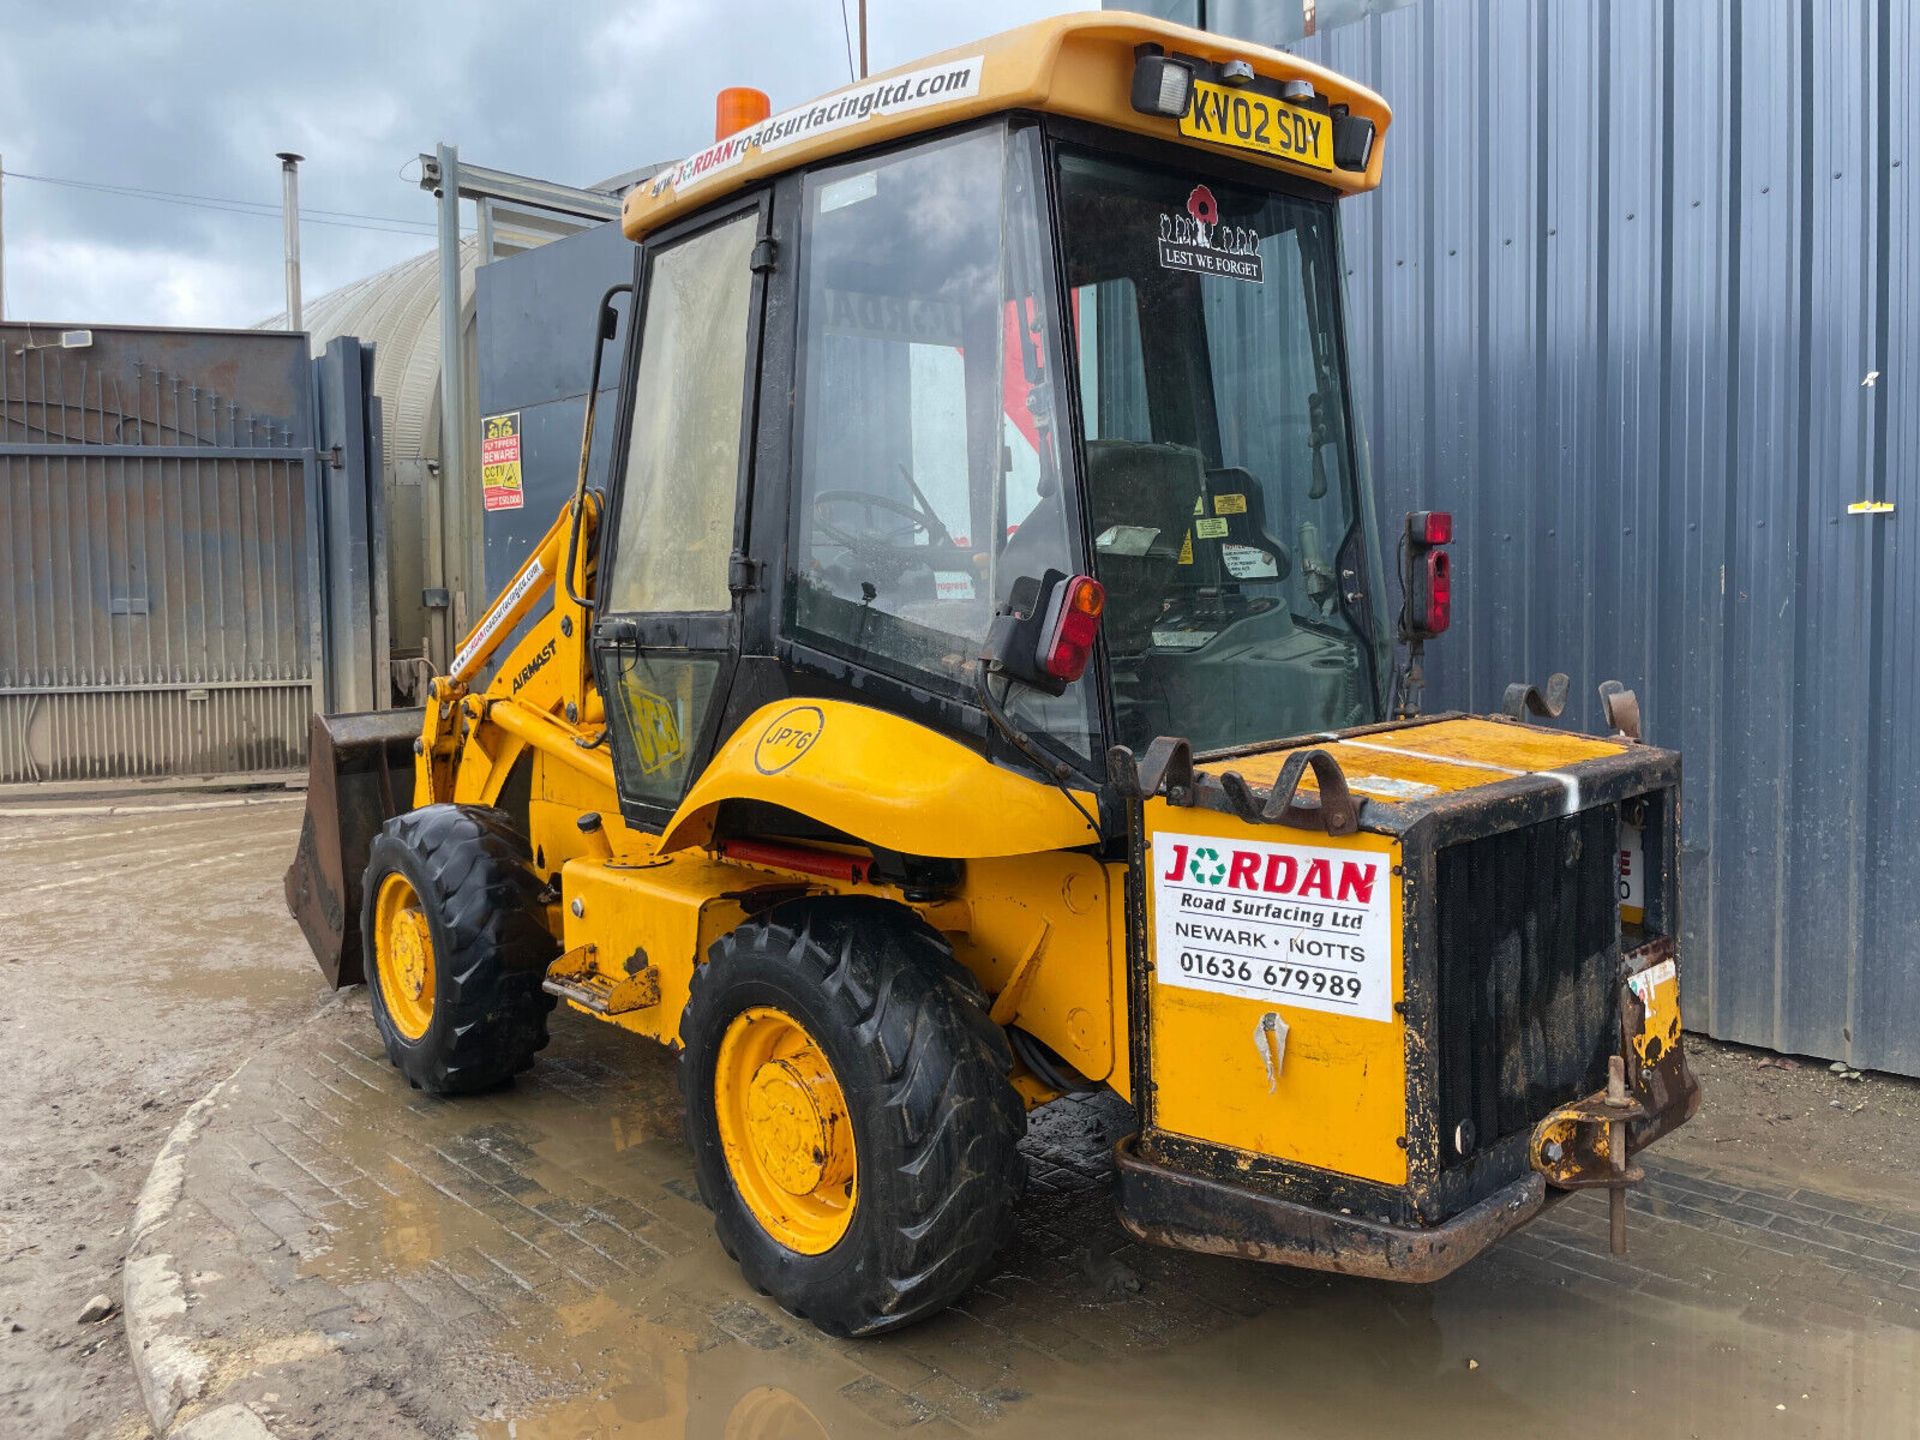 2002 JCB 2CX AIRMASTER: 4X4 LOADER WITH MANUAL GEARBOX POWER - Image 2 of 12